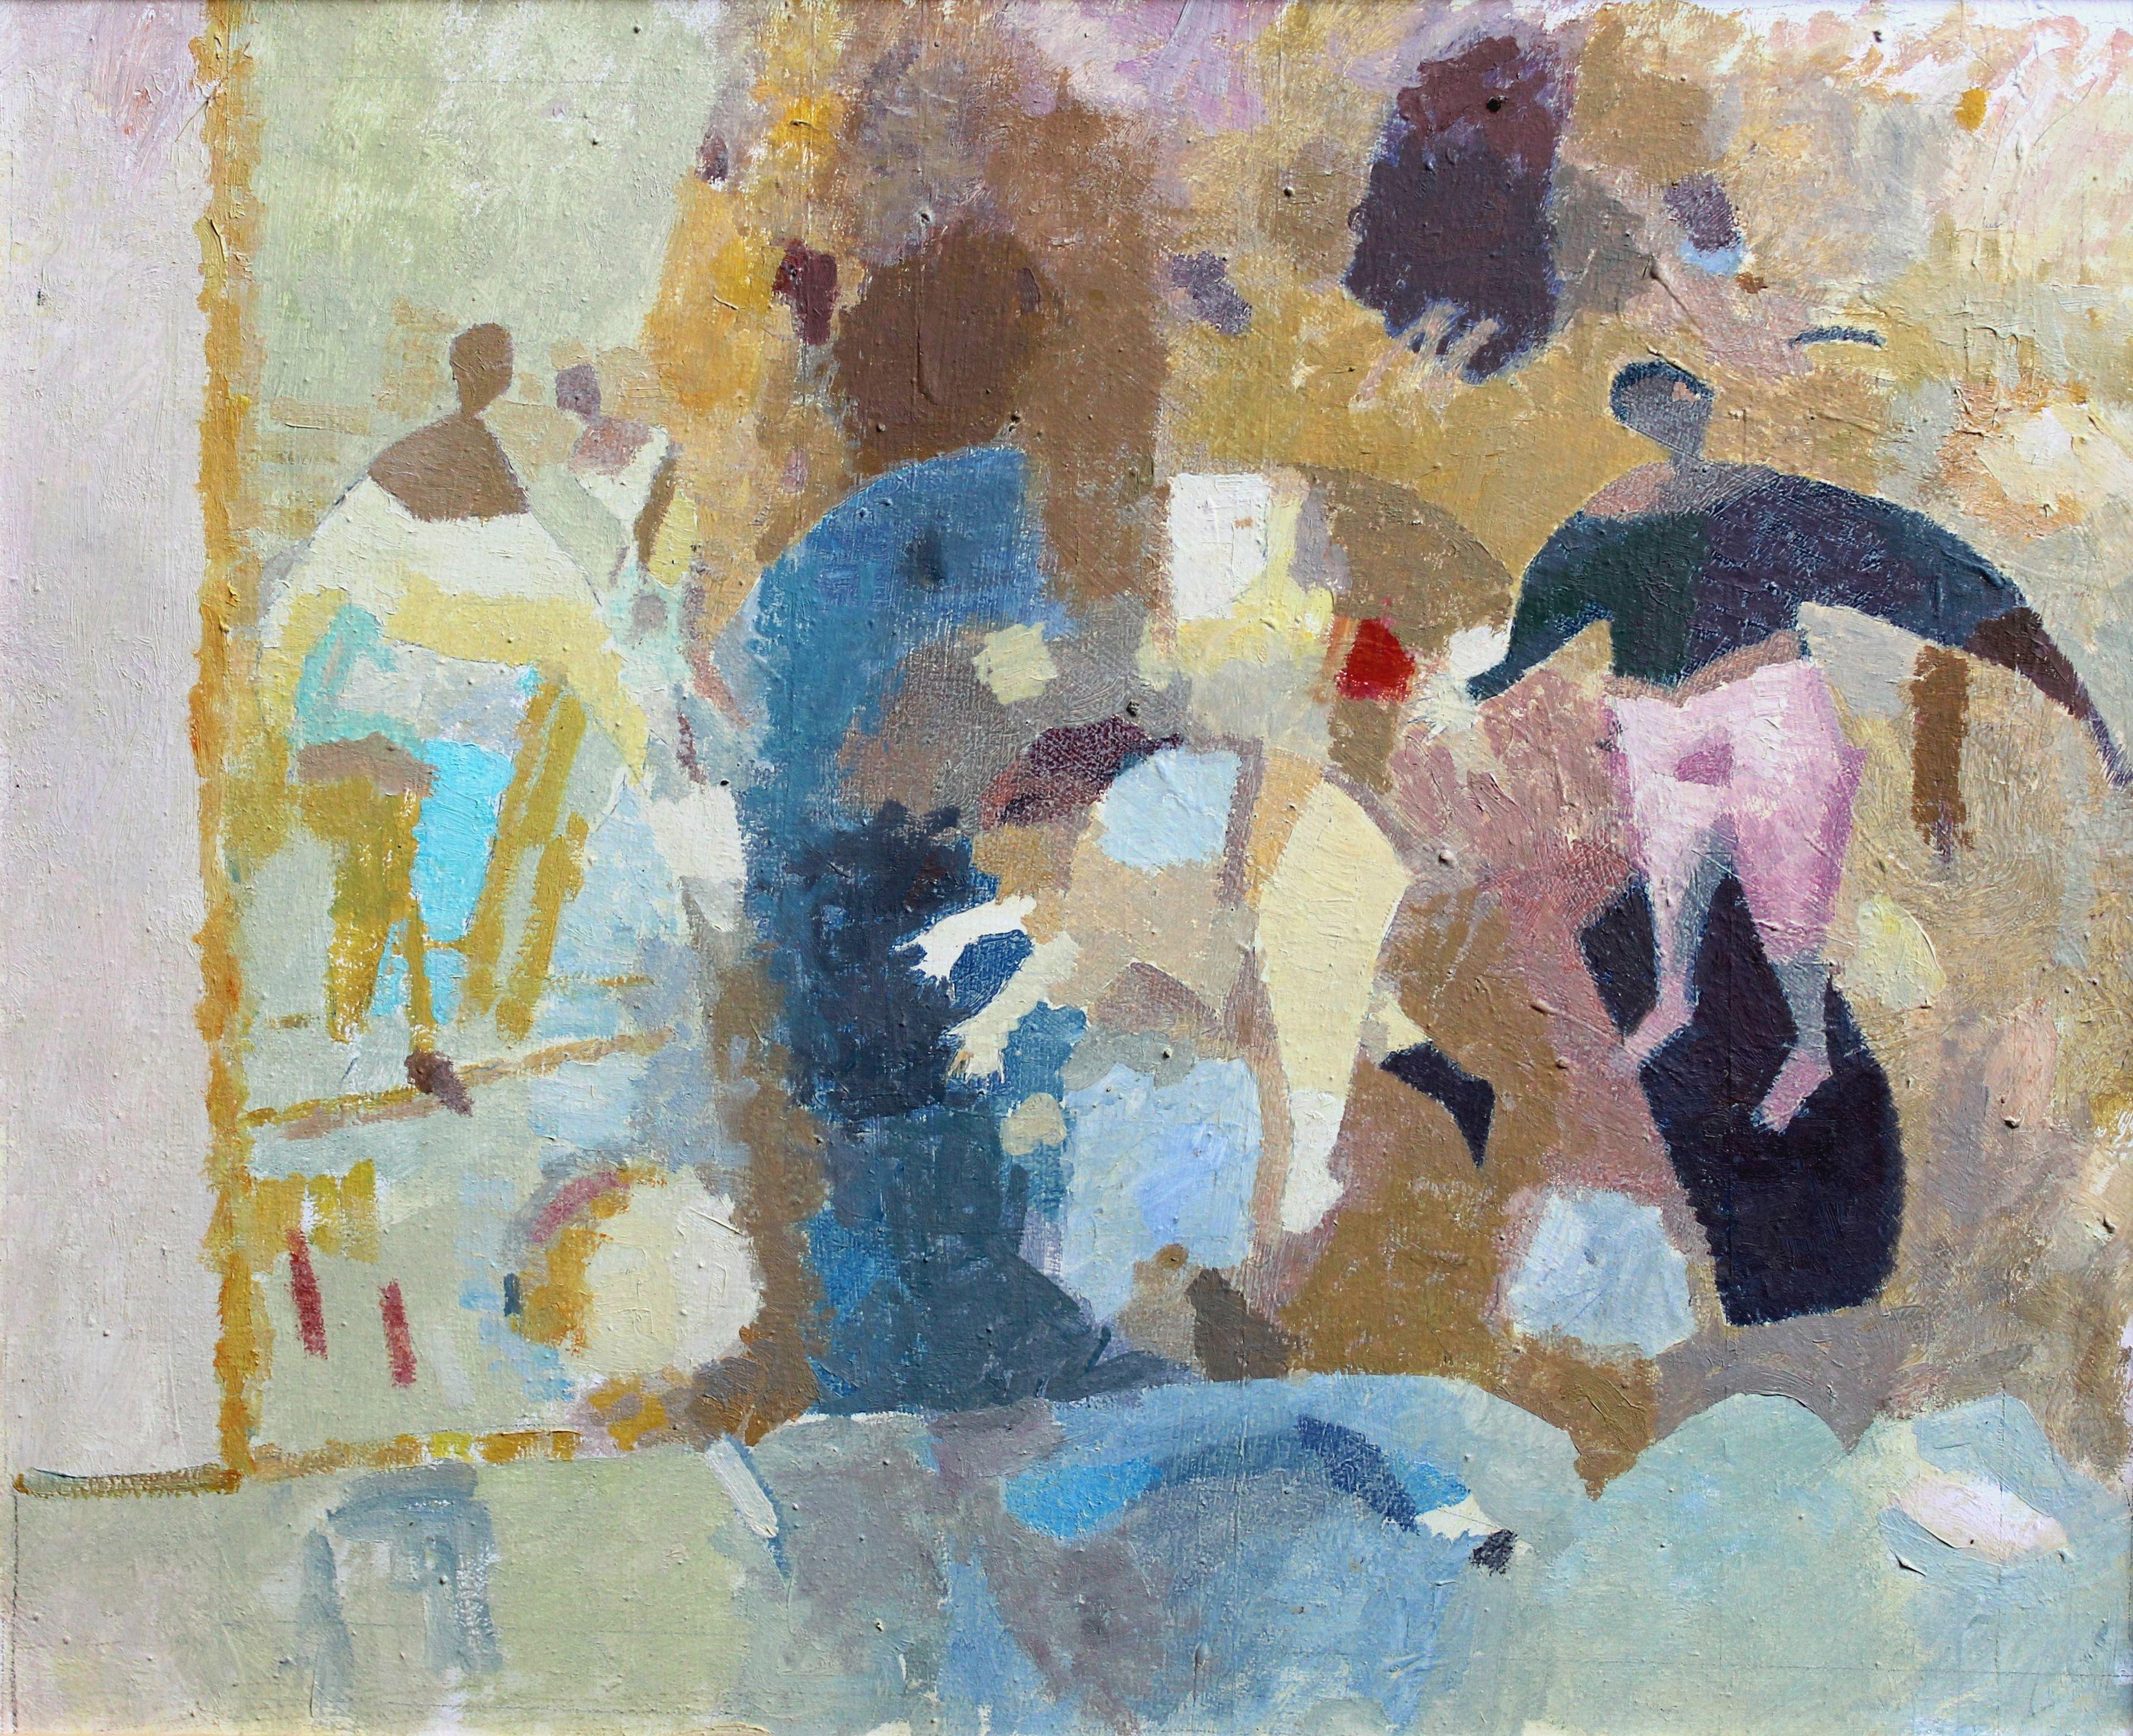 Victor Karnauh  Figurative Painting - Ball game II. Oil on canvas, 46 x 56. 5 cm